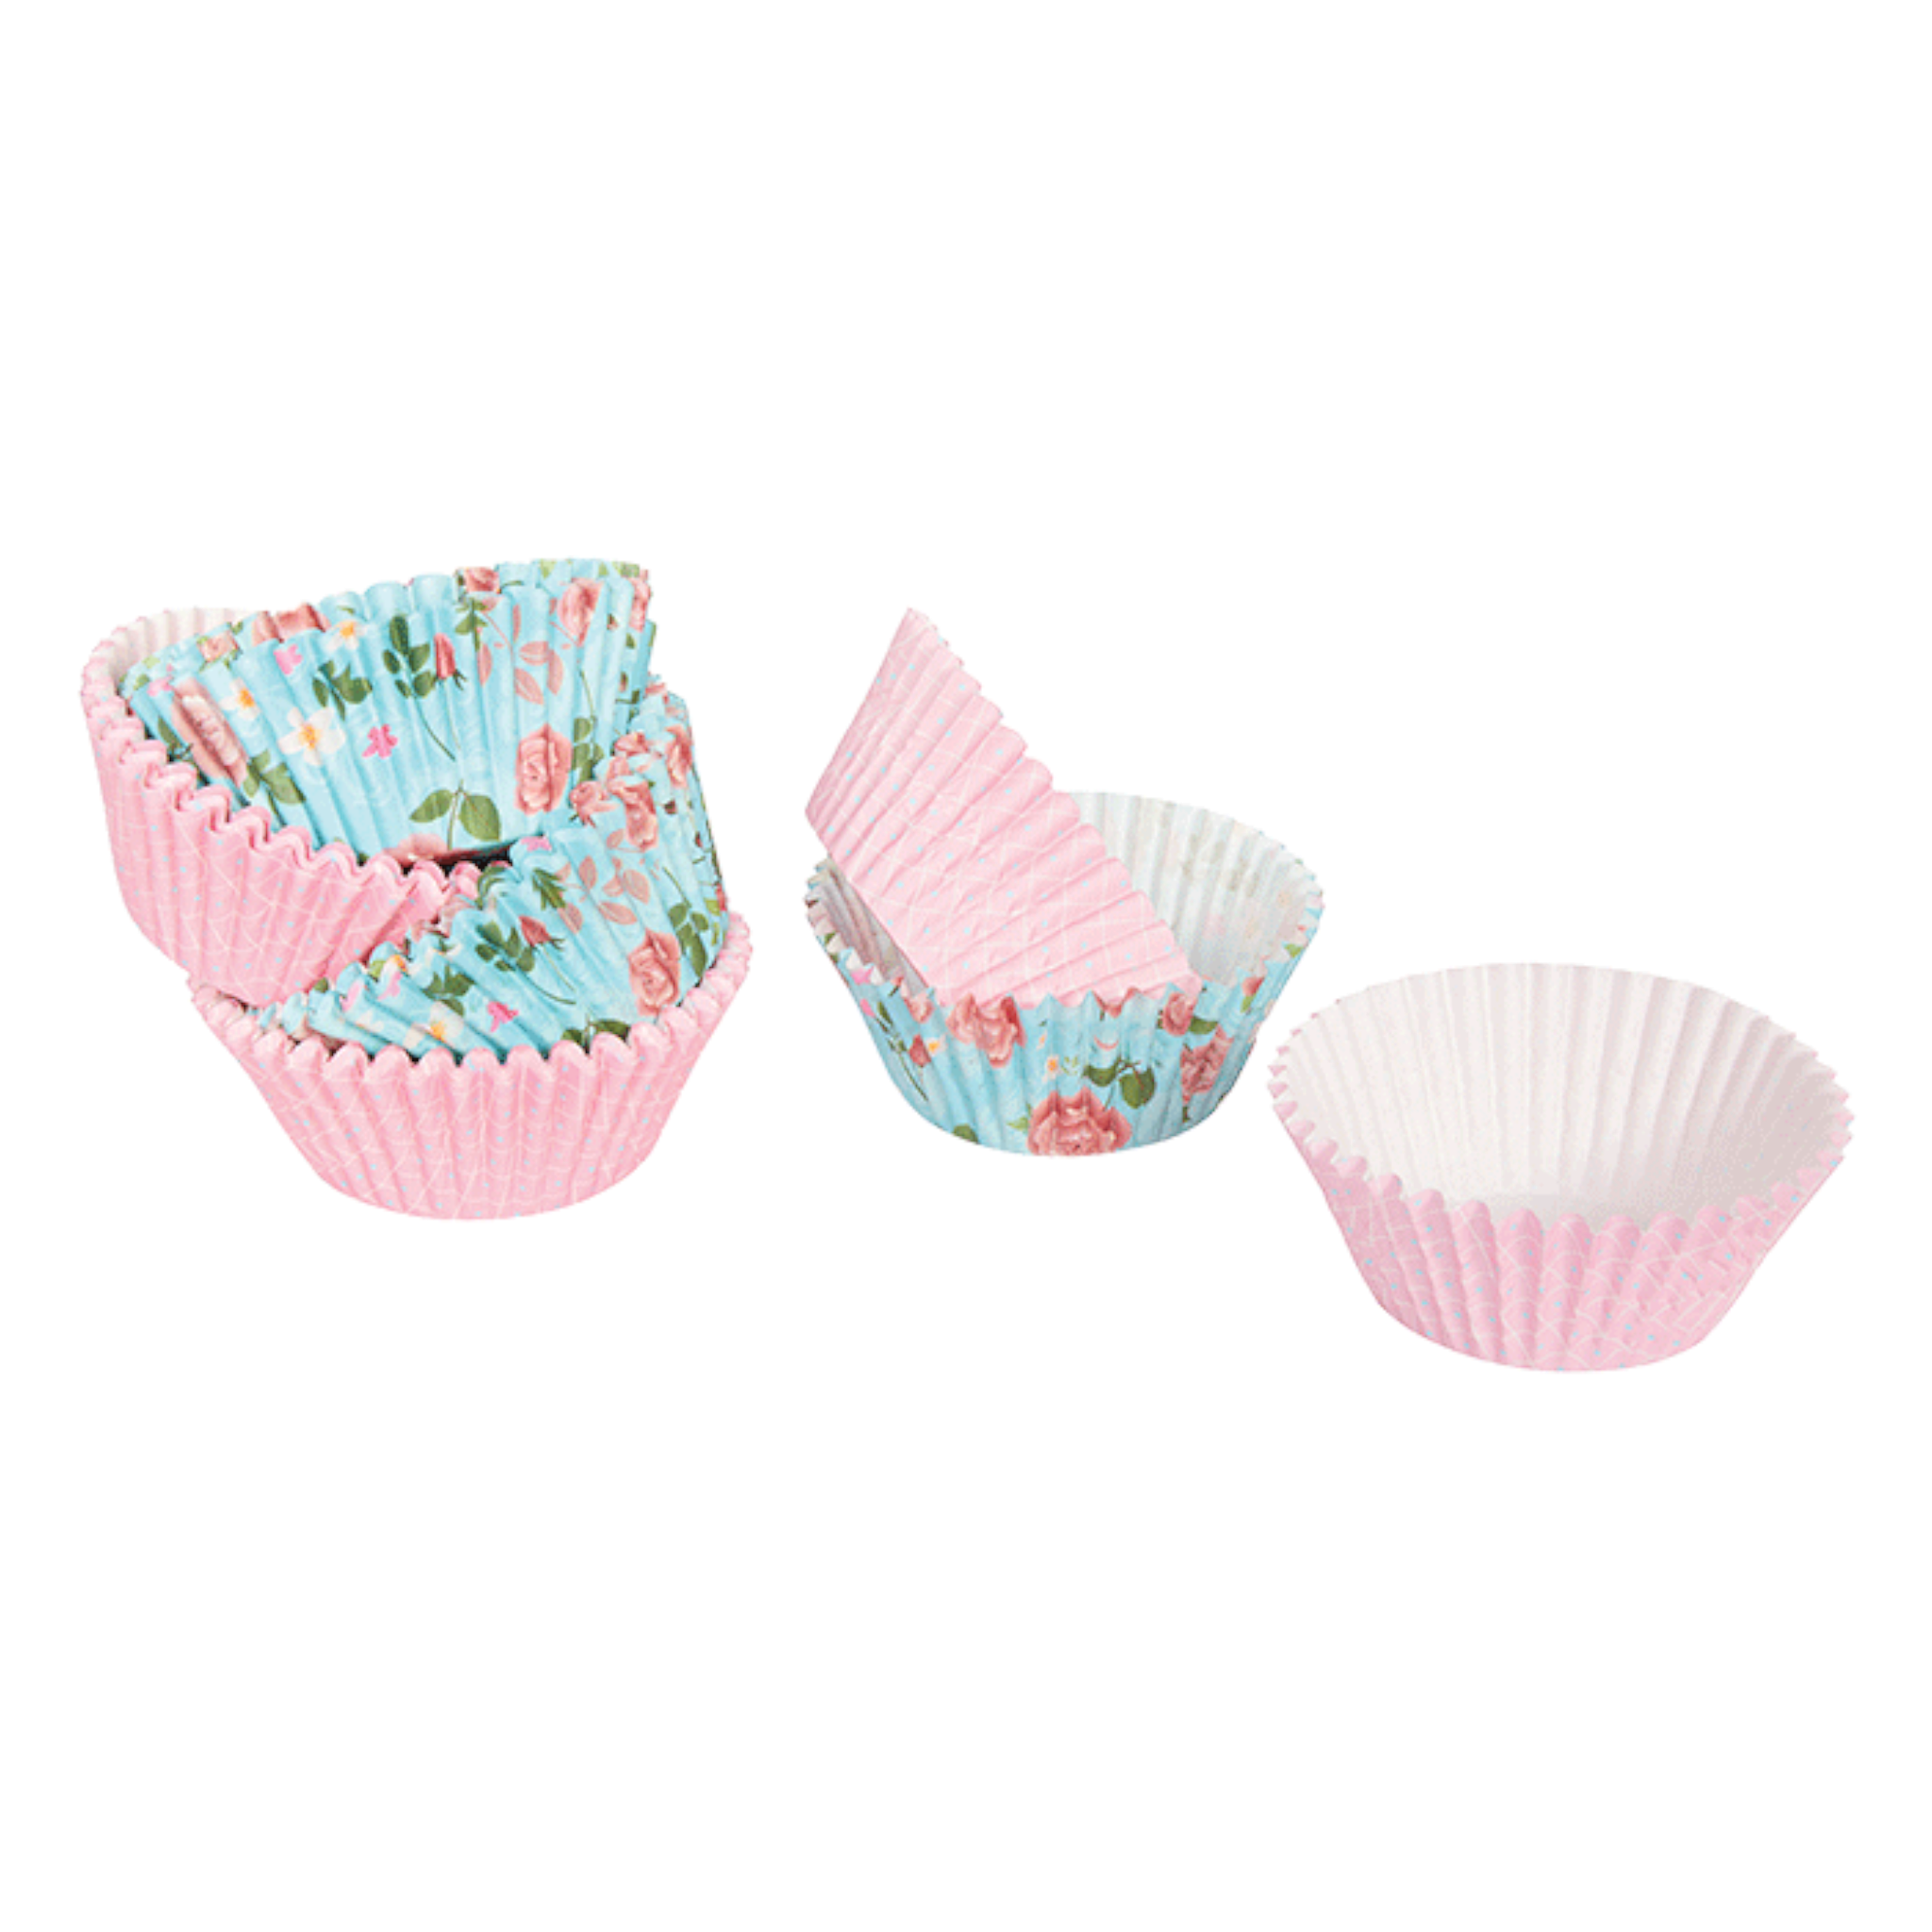 Kitchen Inspire Greaseproof Baking Cupcake Liner Cups 96pcs